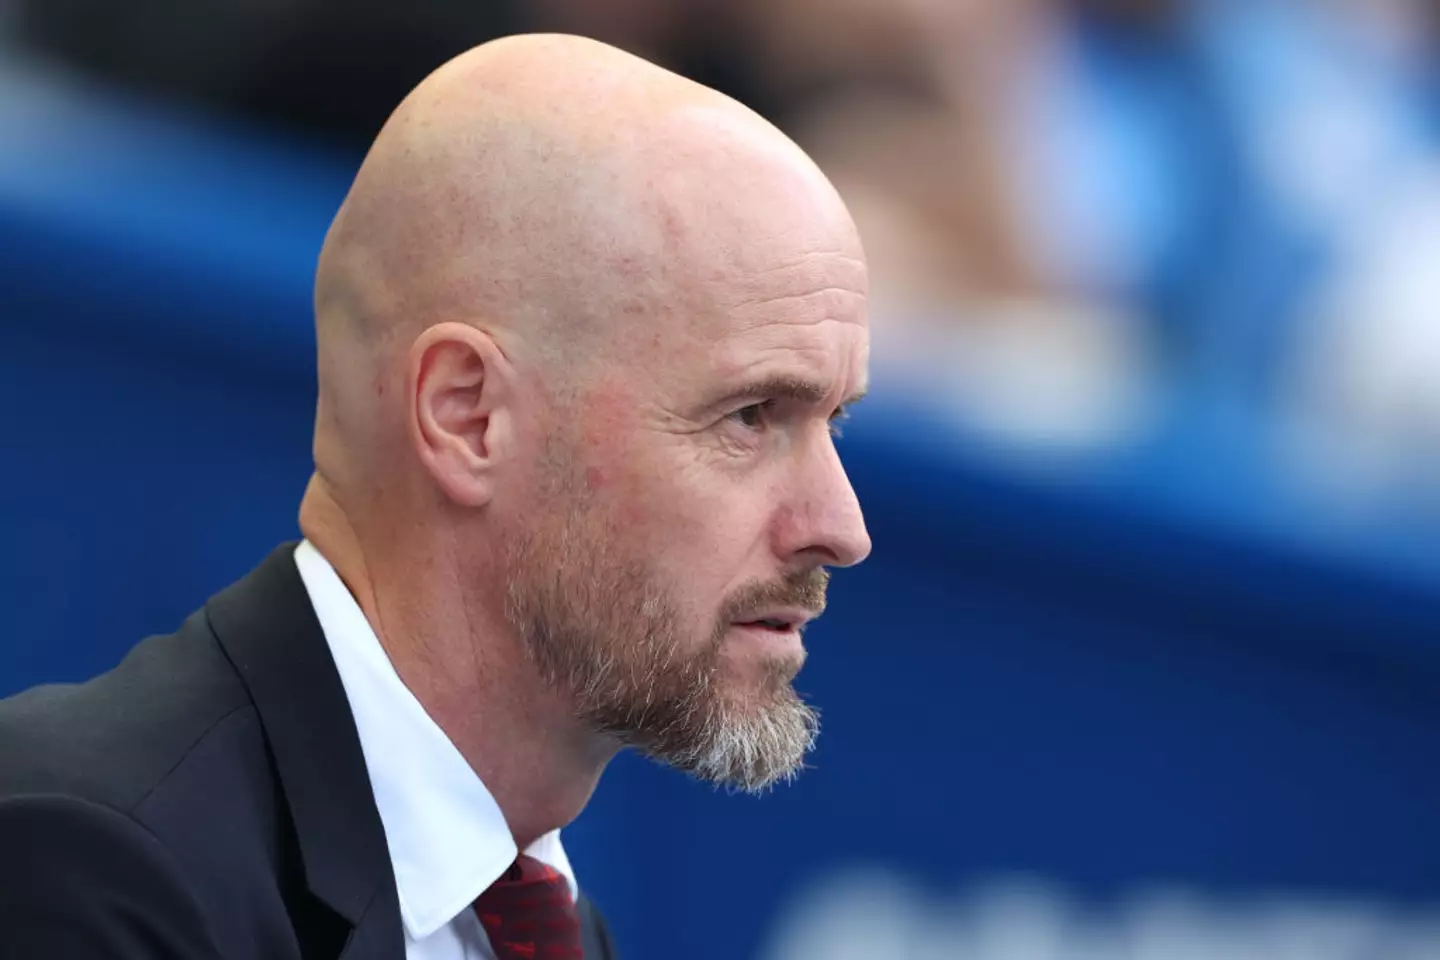 Ten Hag is set to be sacked by United (Image: Getty)